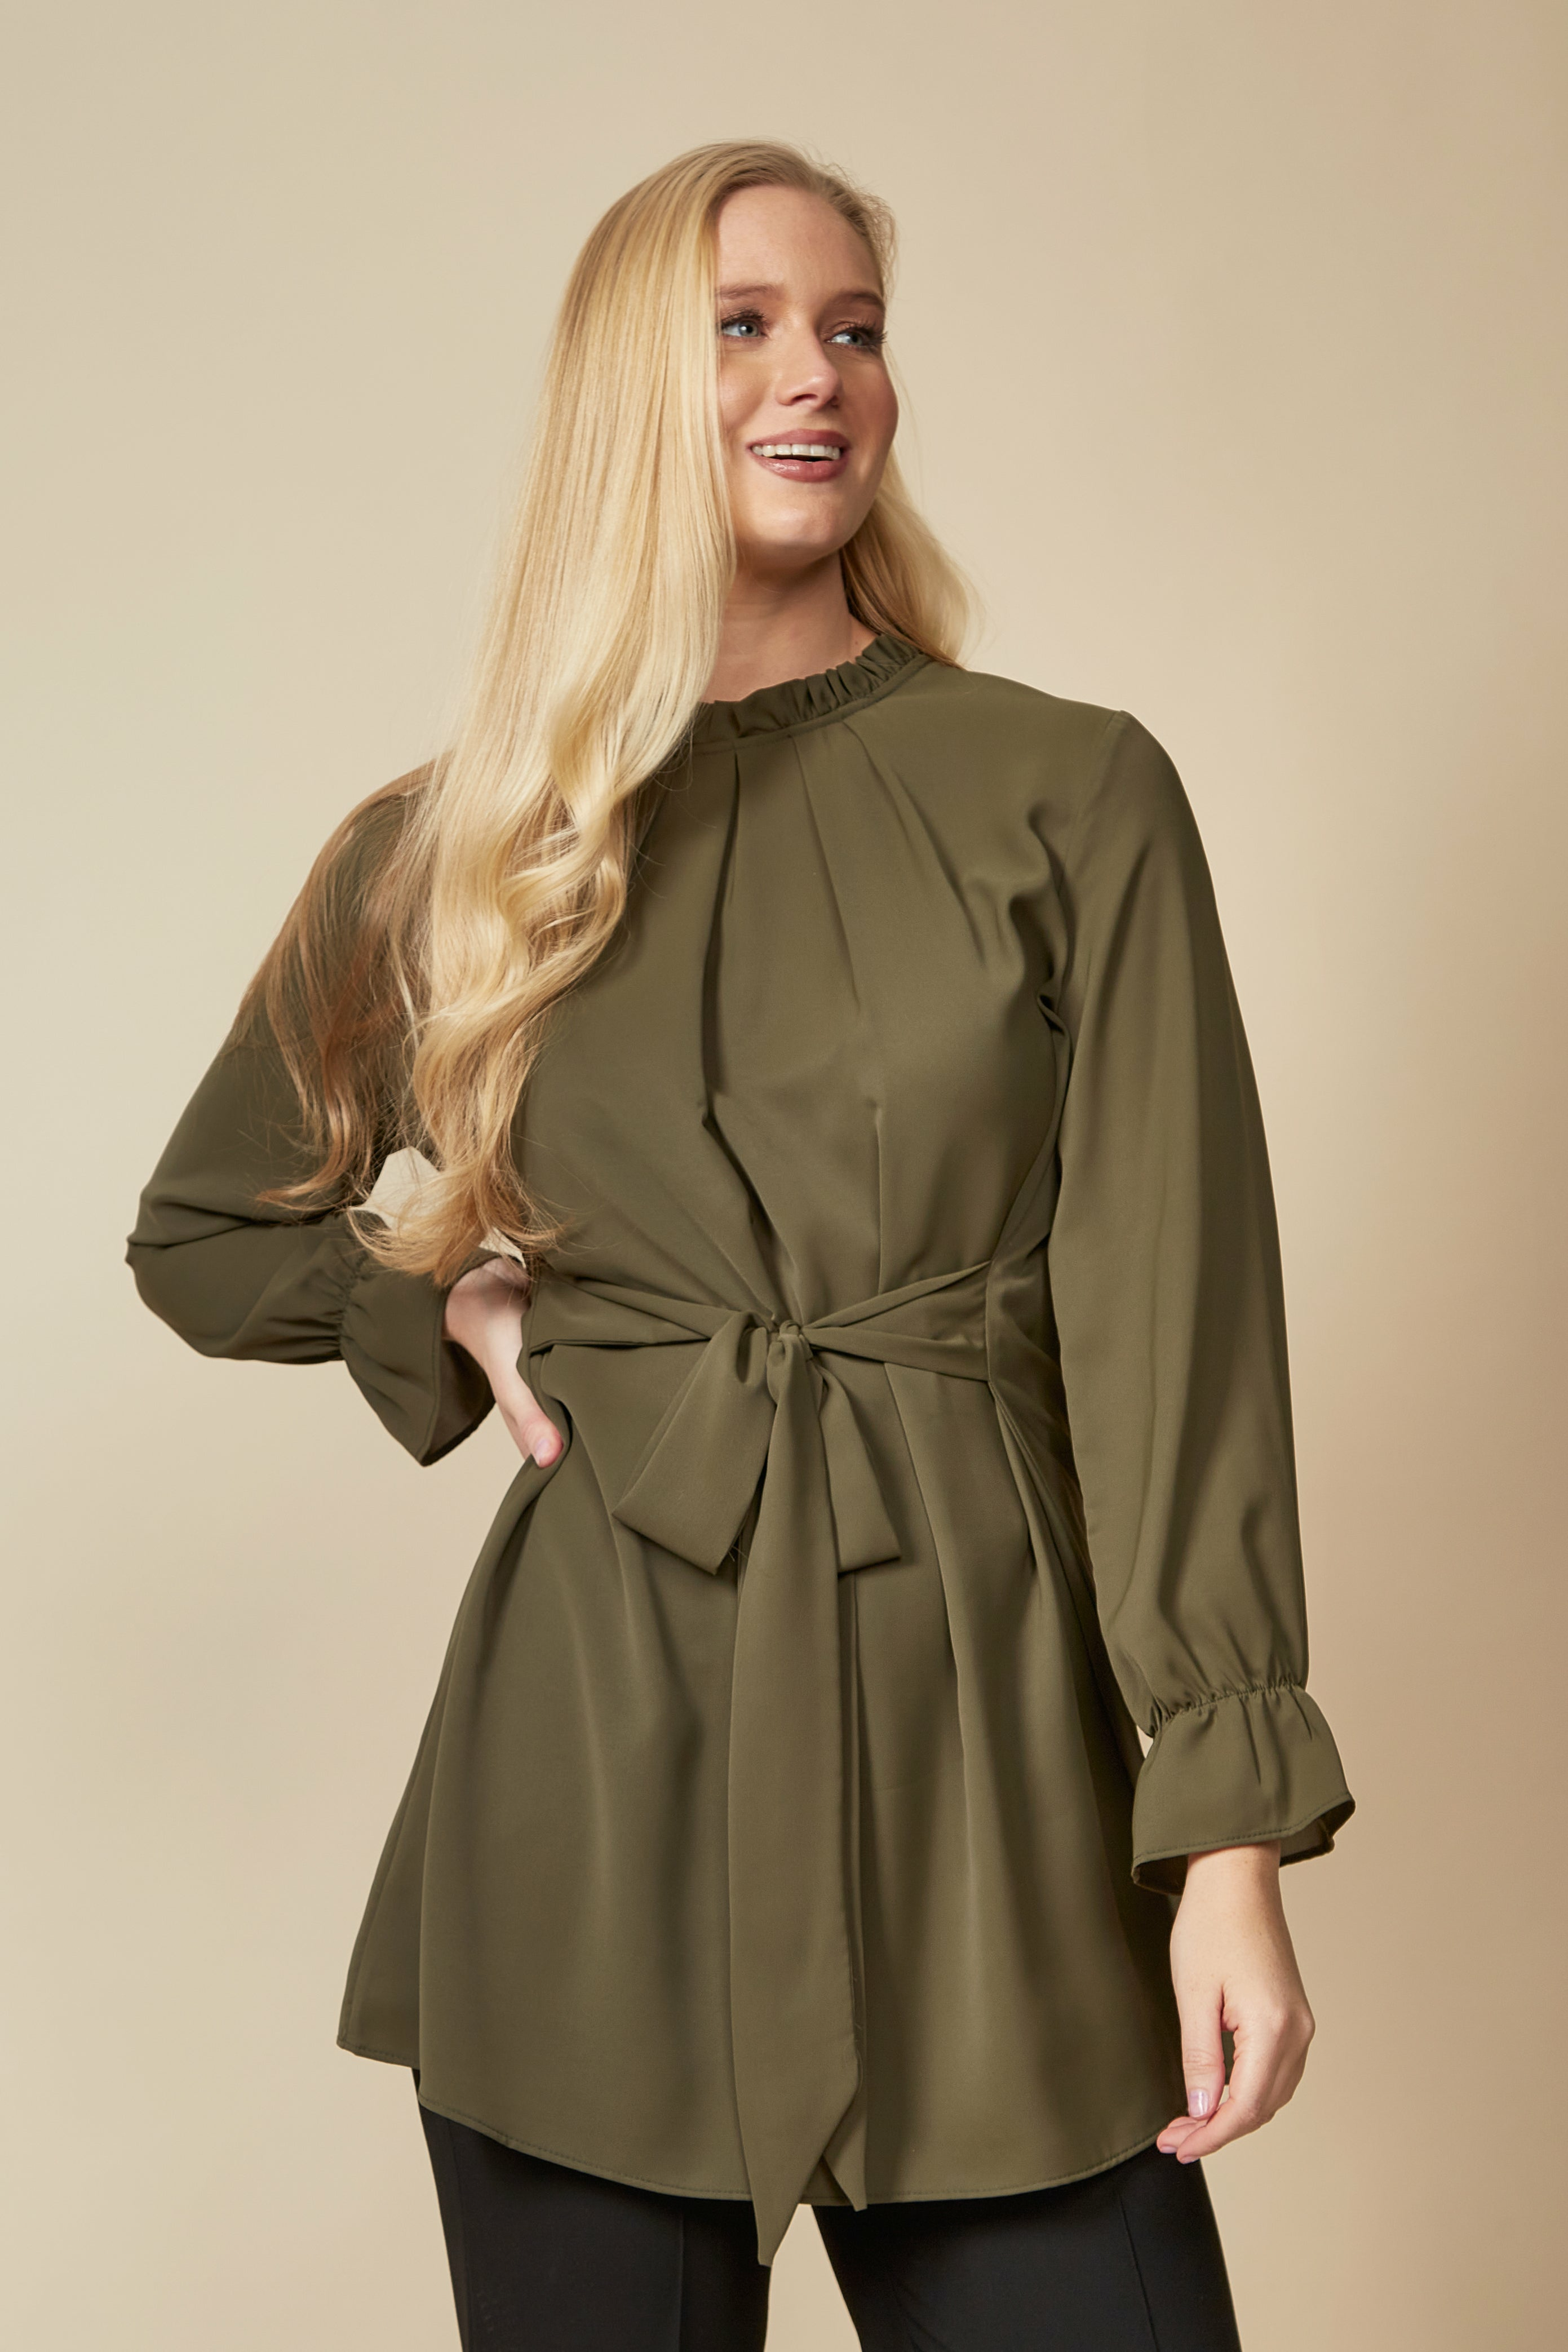 Oversized Tie Ruffle Neck Top with Tie Waist Detailed in Khaki GLR FASHION NETWORKING